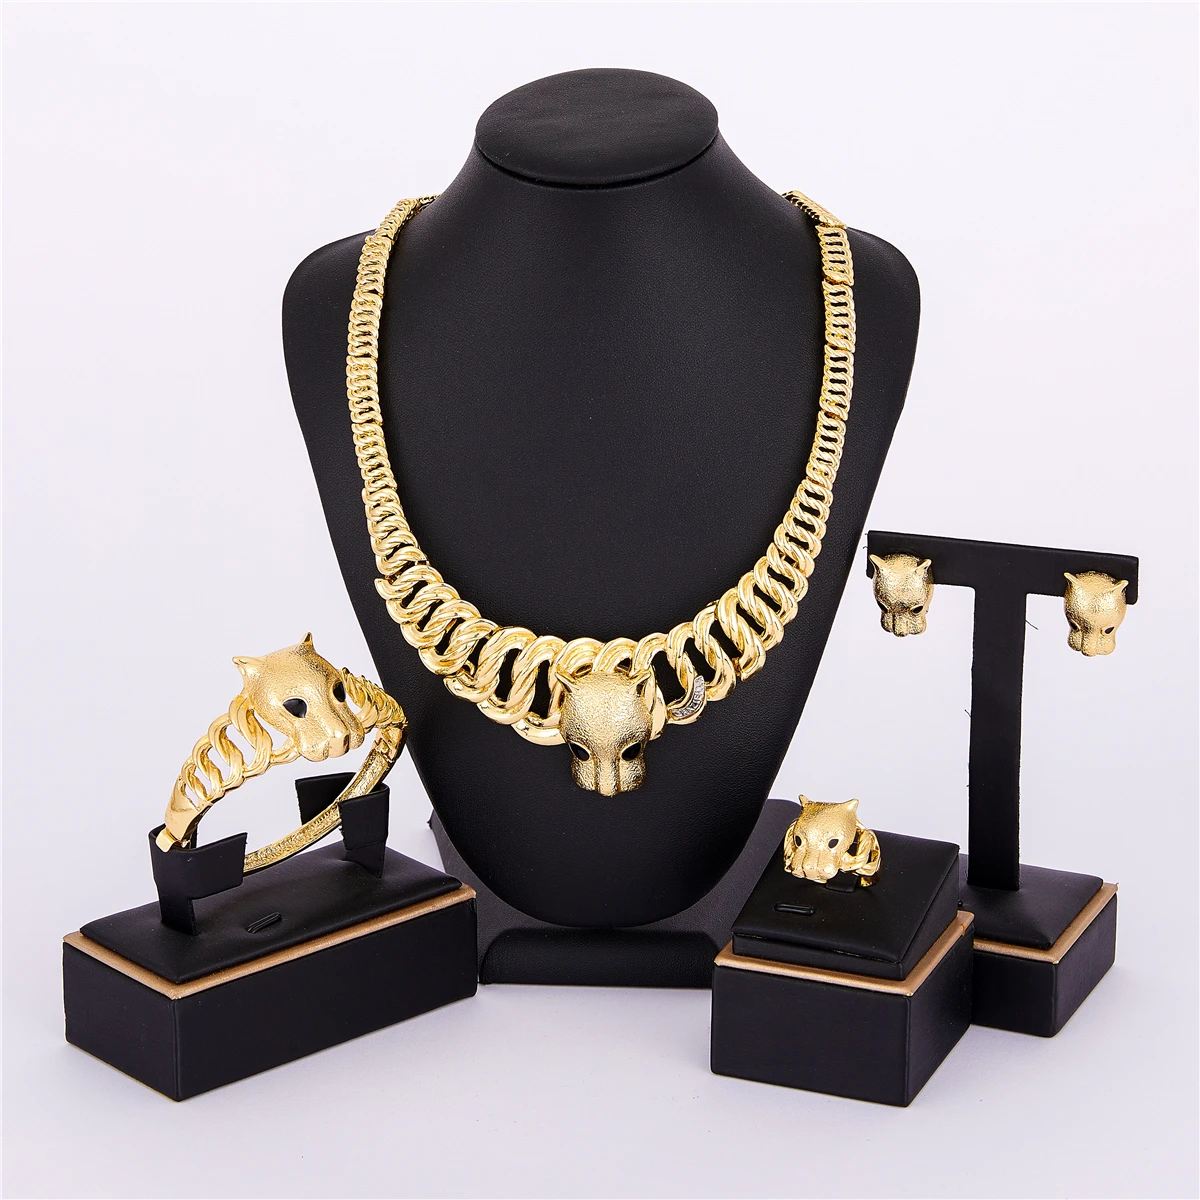 2022 New Fashion Animal Indian Jewelry Set Exquisite Gold-plated Wedding Women's Metal Accessories Party Holiday Birthday Gift